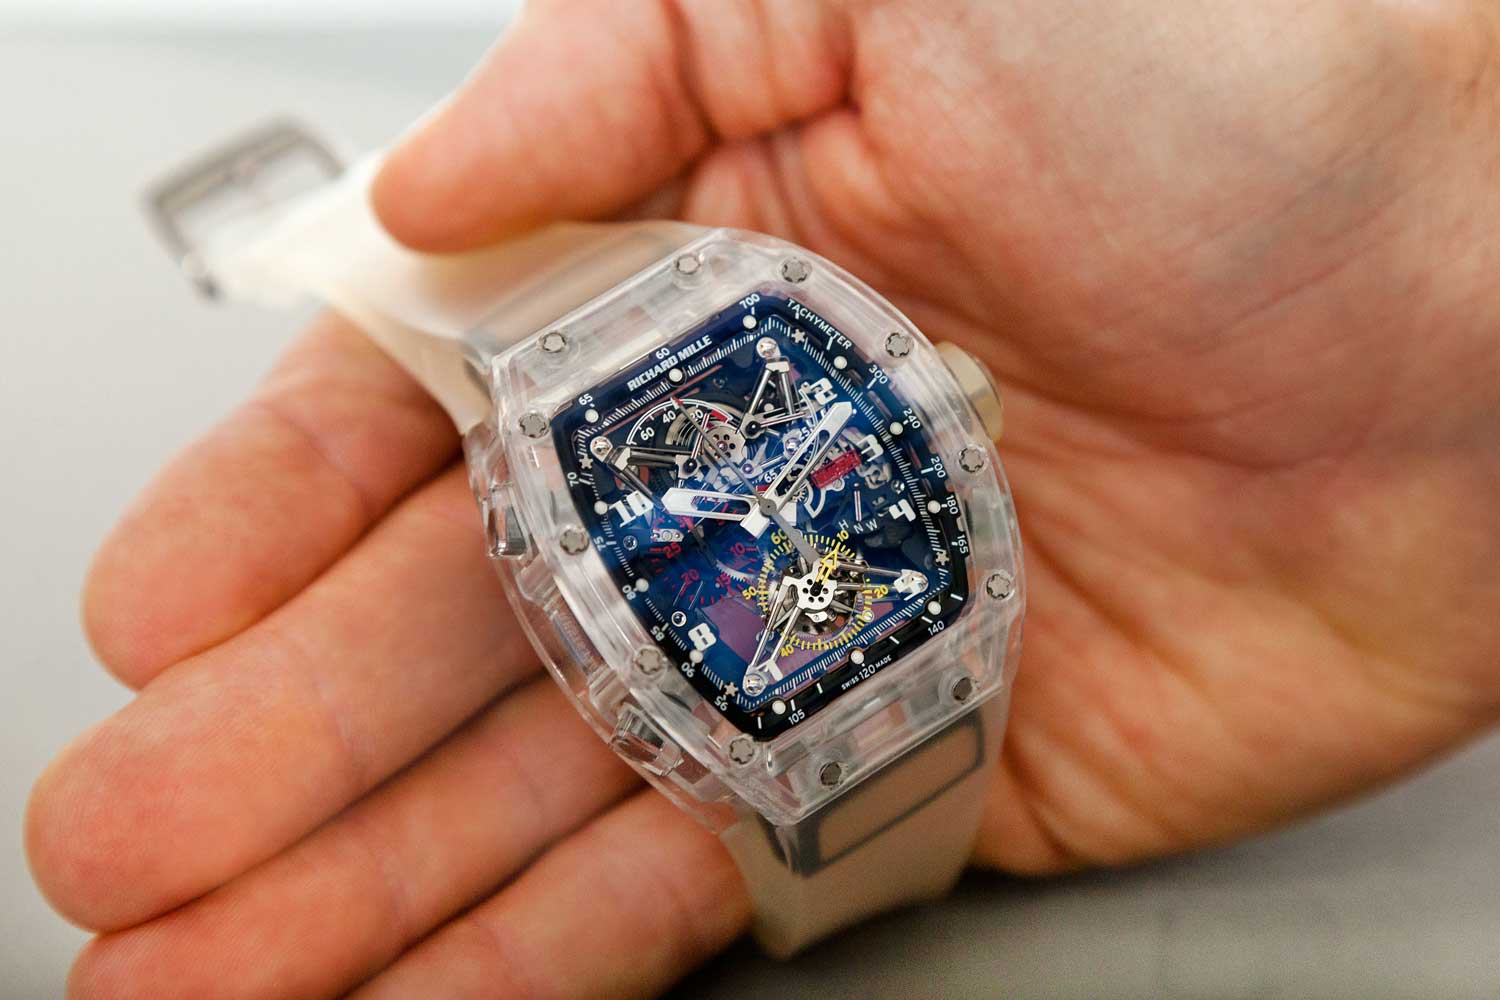 Richard Mille RM 056 Prototype No. 2 at Christie's 2017 NY sale